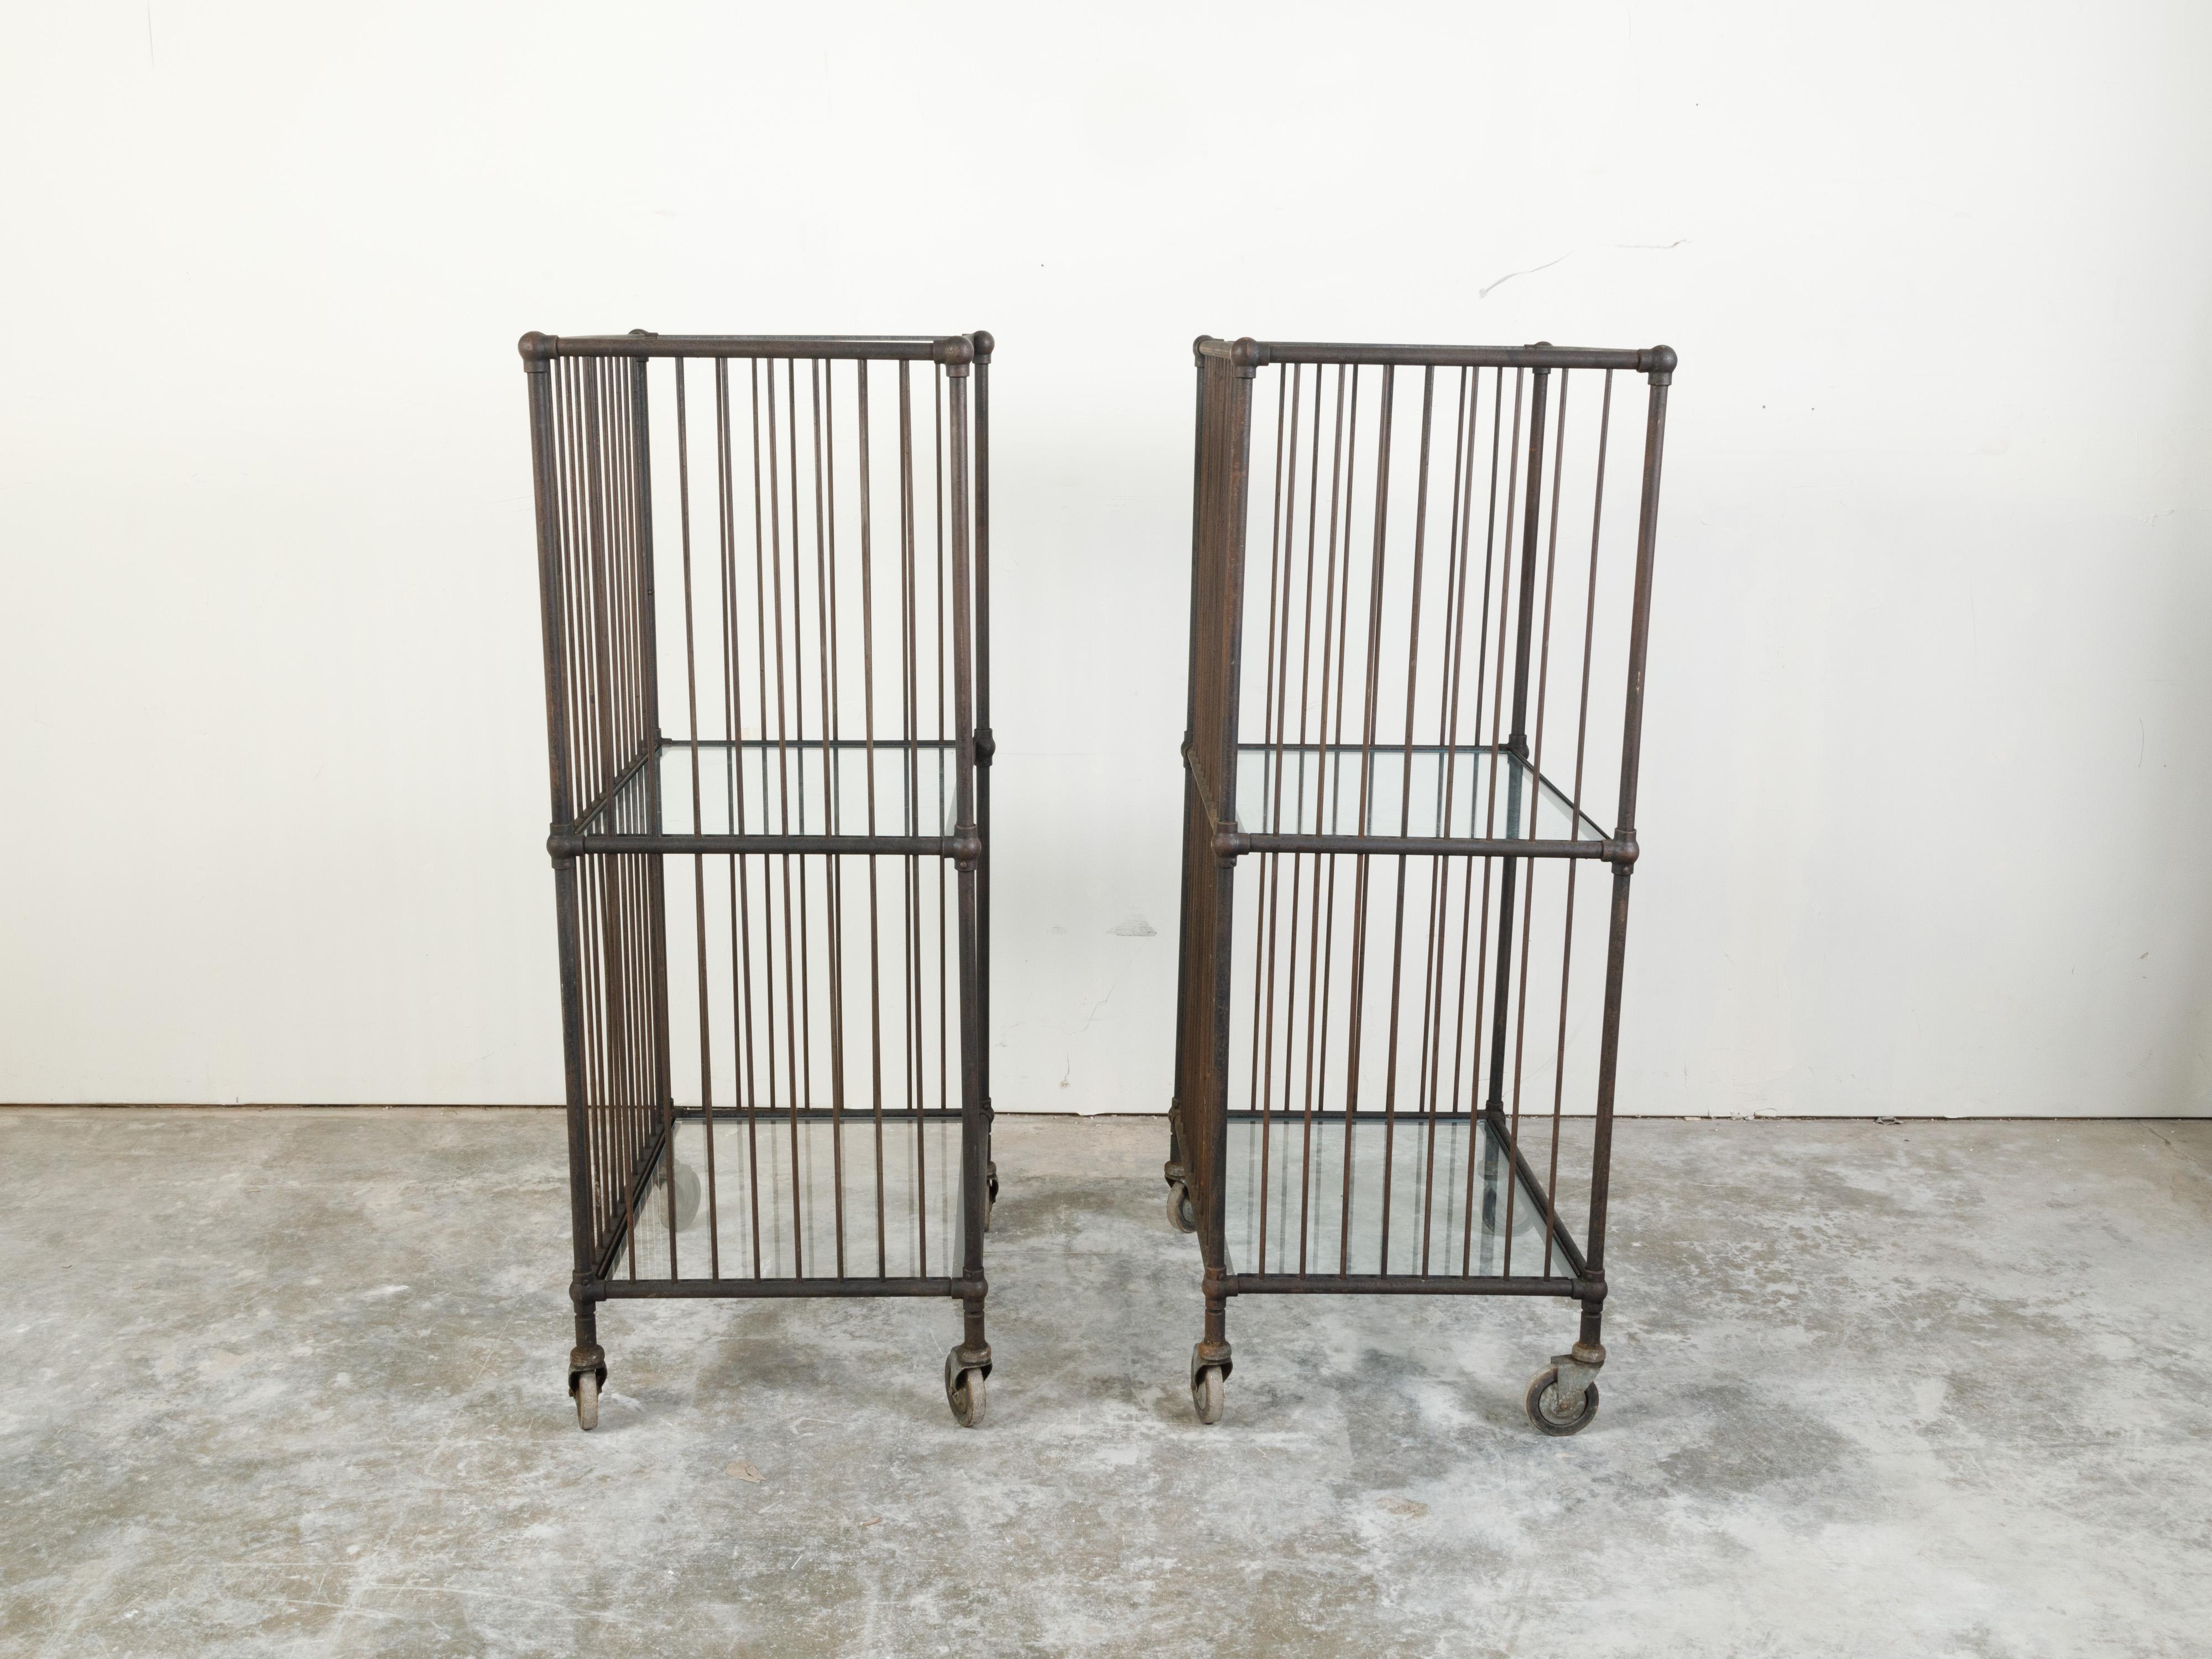 Vintage Industrial Carts with Glass Shelves and Casters, Sold Individually For Sale 2